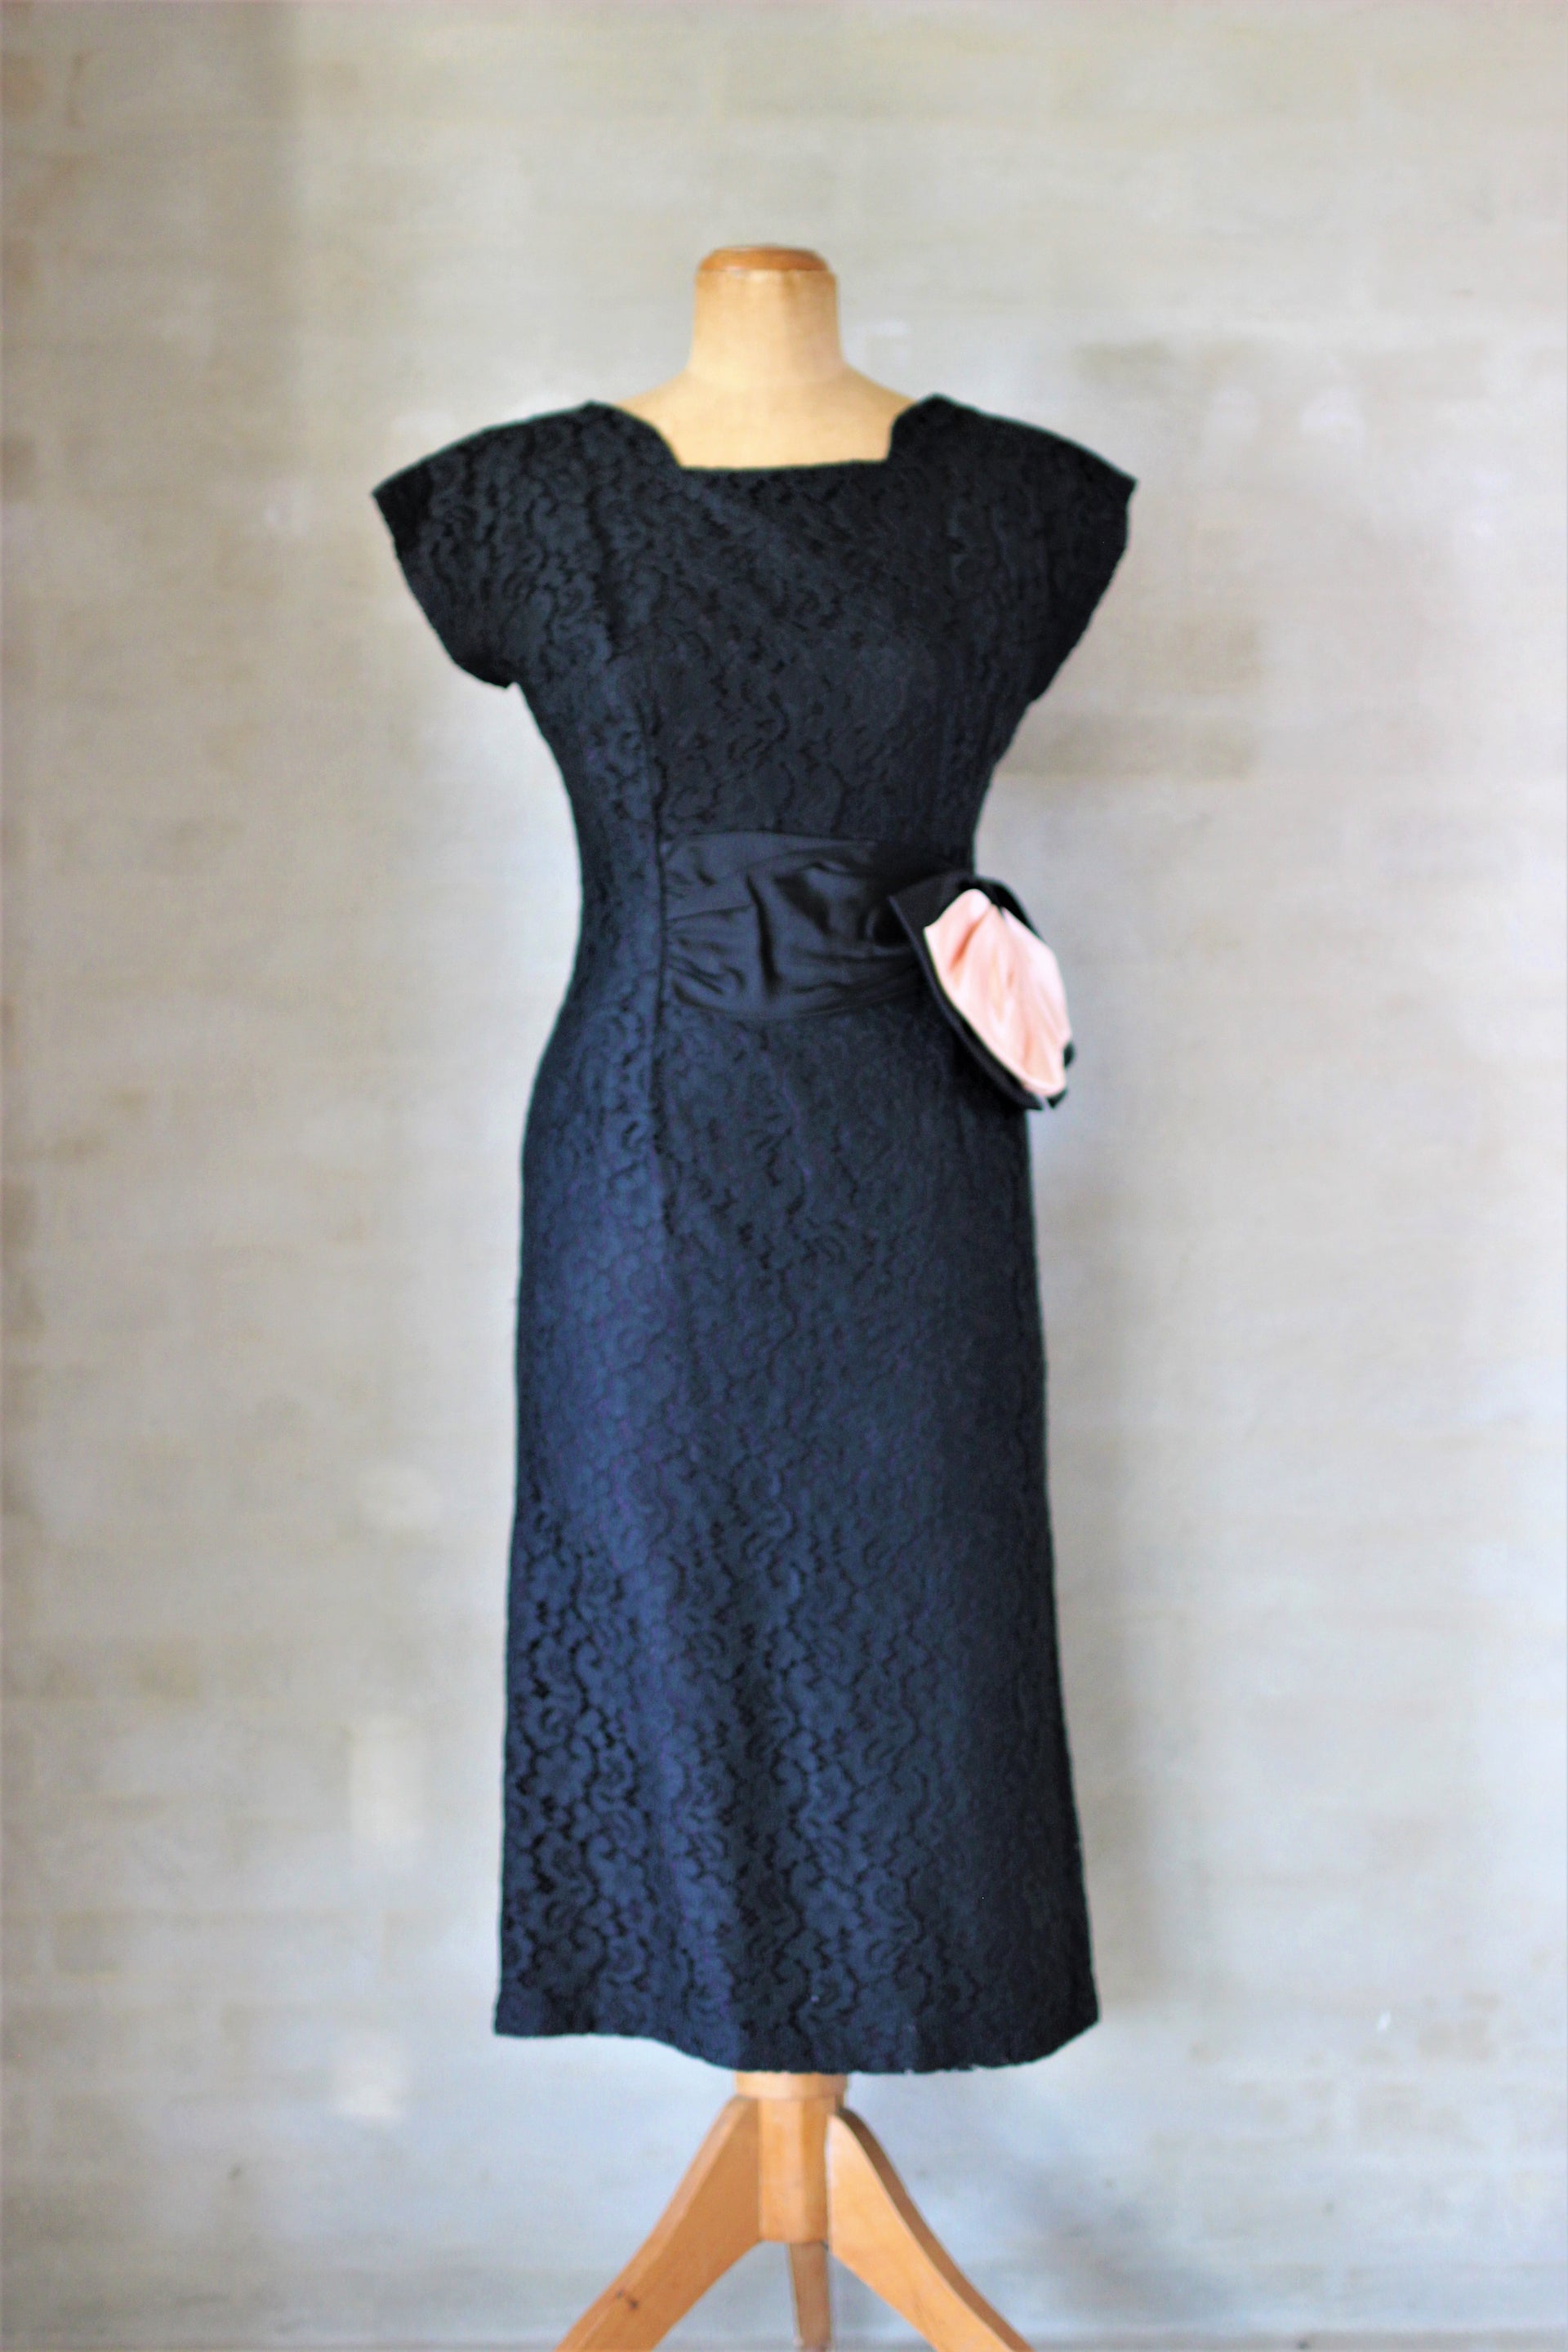 1950s Black Lace Dress with a Large Pink Bow//Size S/M